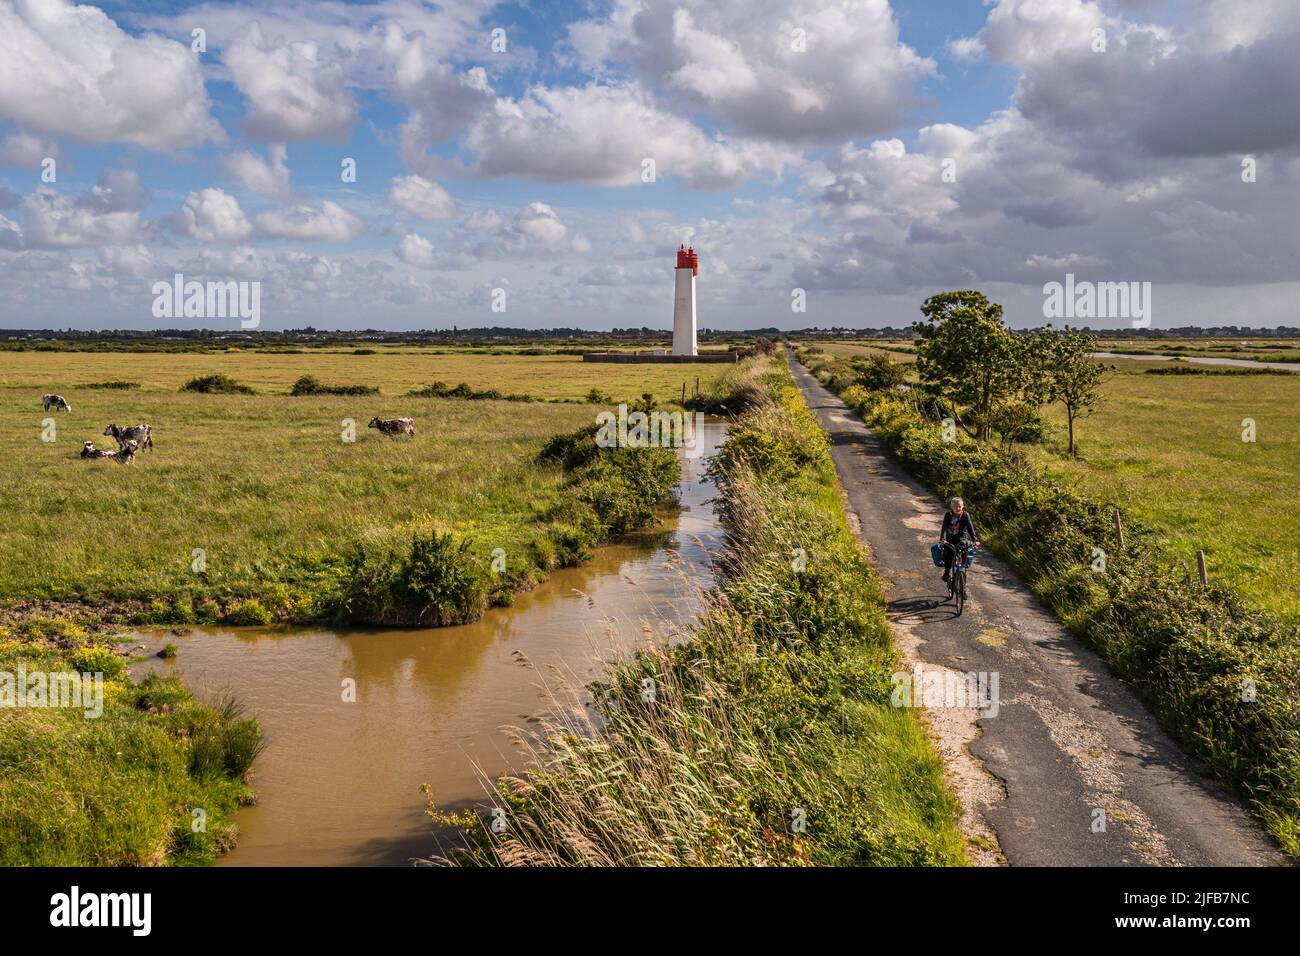 France, Charente-Maritime, Fouras, cyclist traveling along the Flow Vélo cycle route, cows in the salt meadows of the flood-prone areas of the Charente estuary and Soumard rear alignment lighthouse (aerial view) Stock Photo